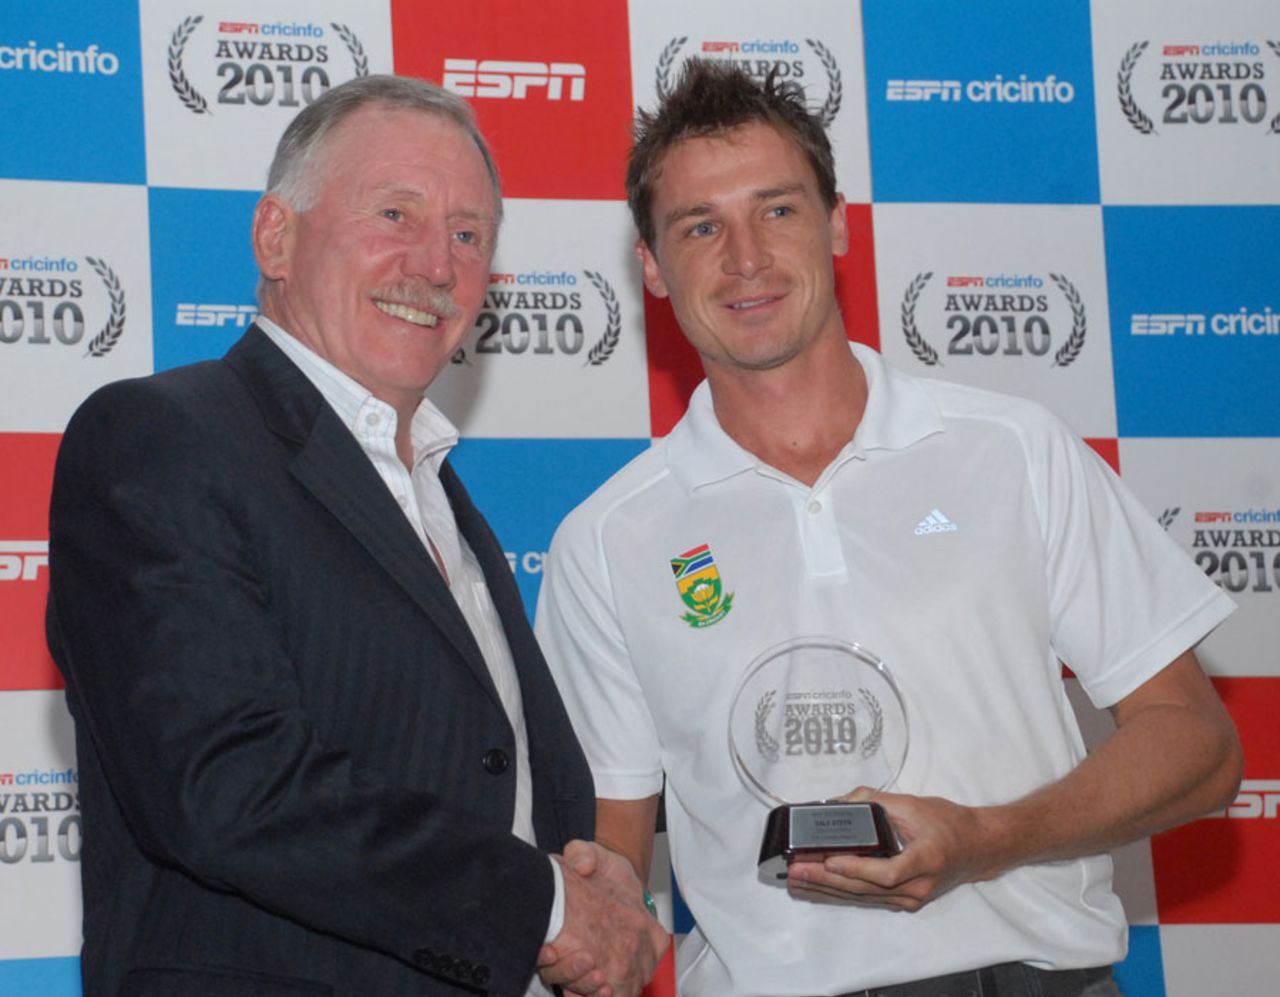 Dale Steyn receives the ESPNcricinfo Test bowling award from Ian Chappell, Bangalore, February 14, 2011